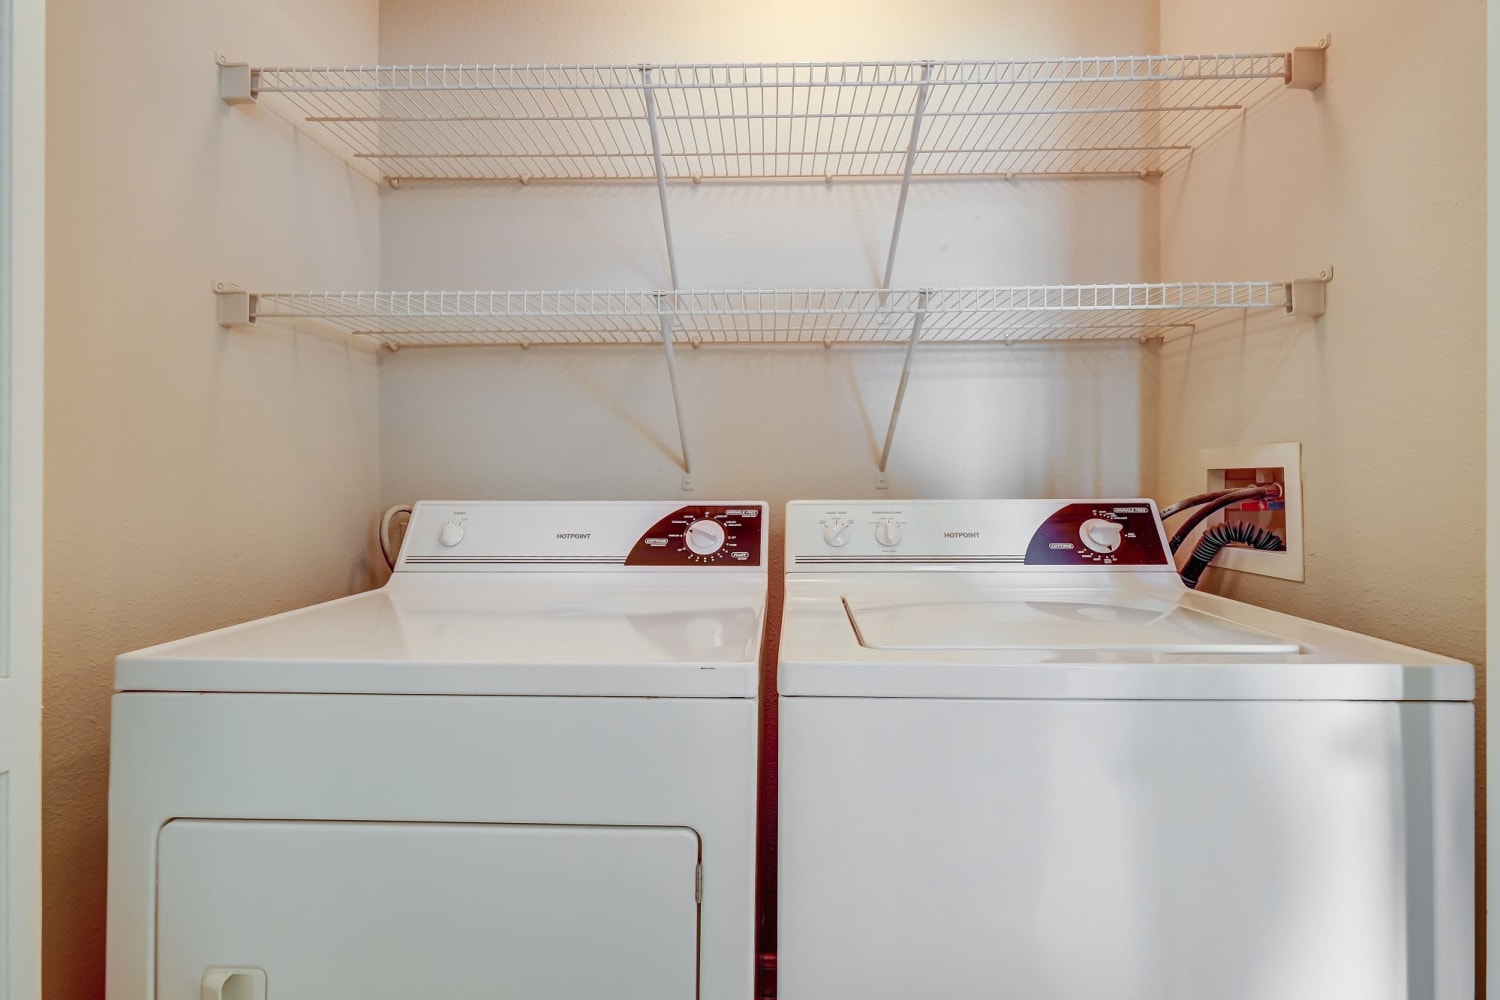 Washer and dryer at Chateau Des Lions Apartment Homes